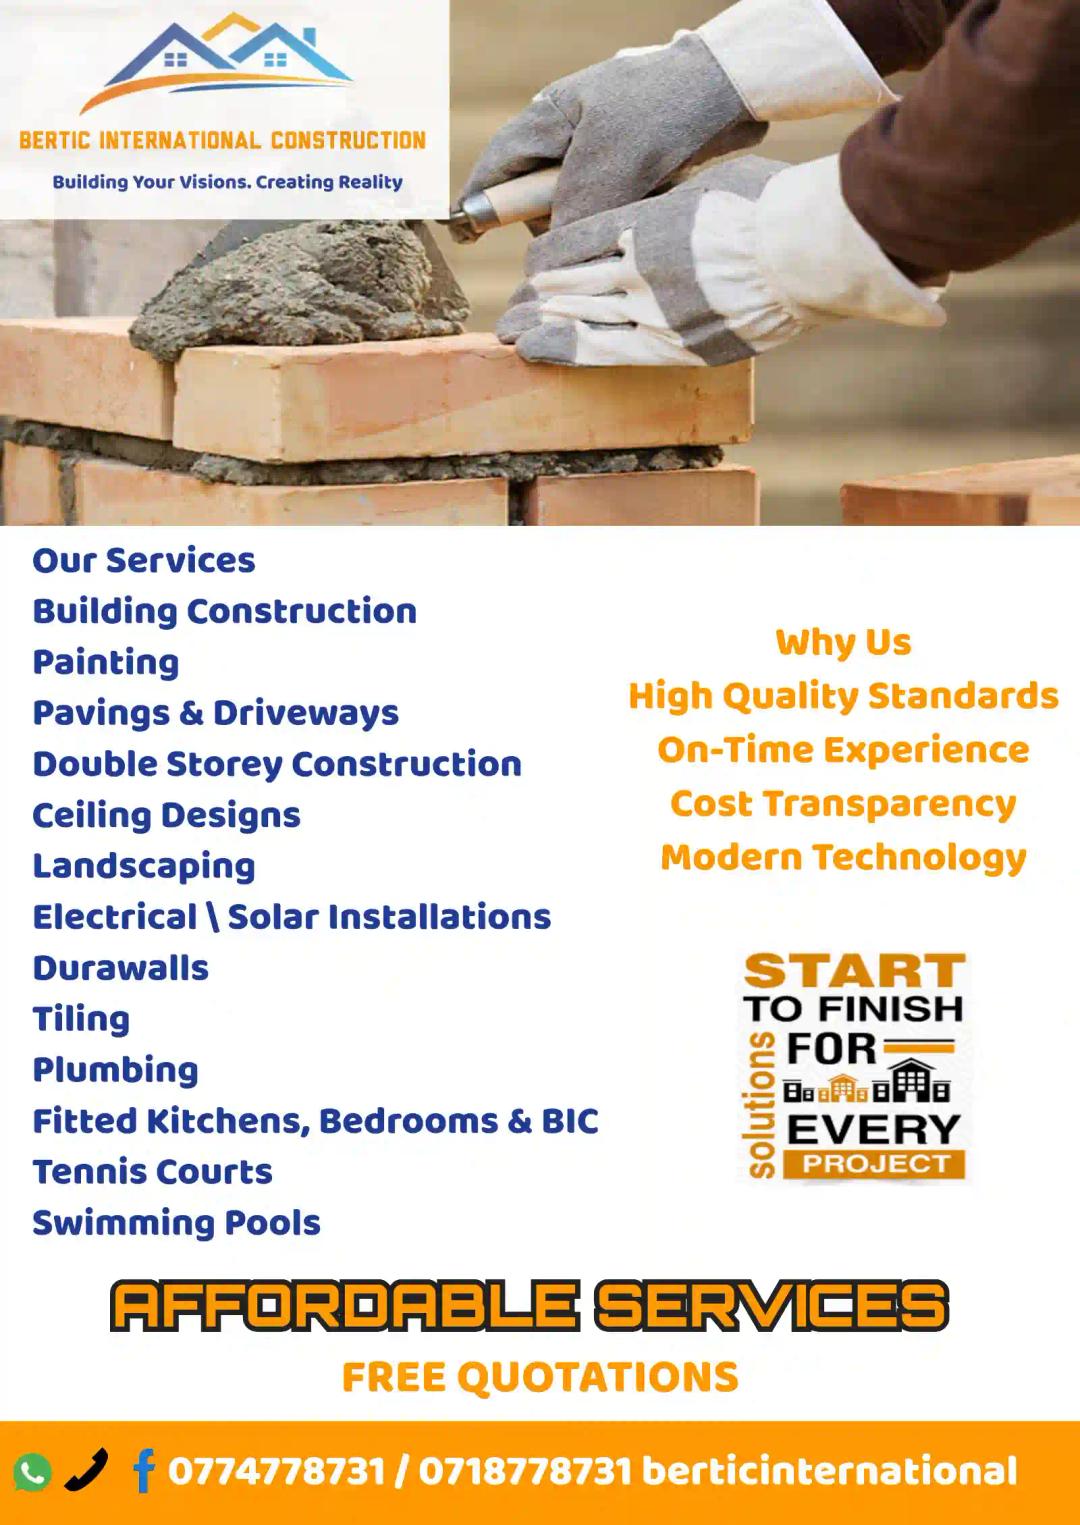 All In One Construction Services